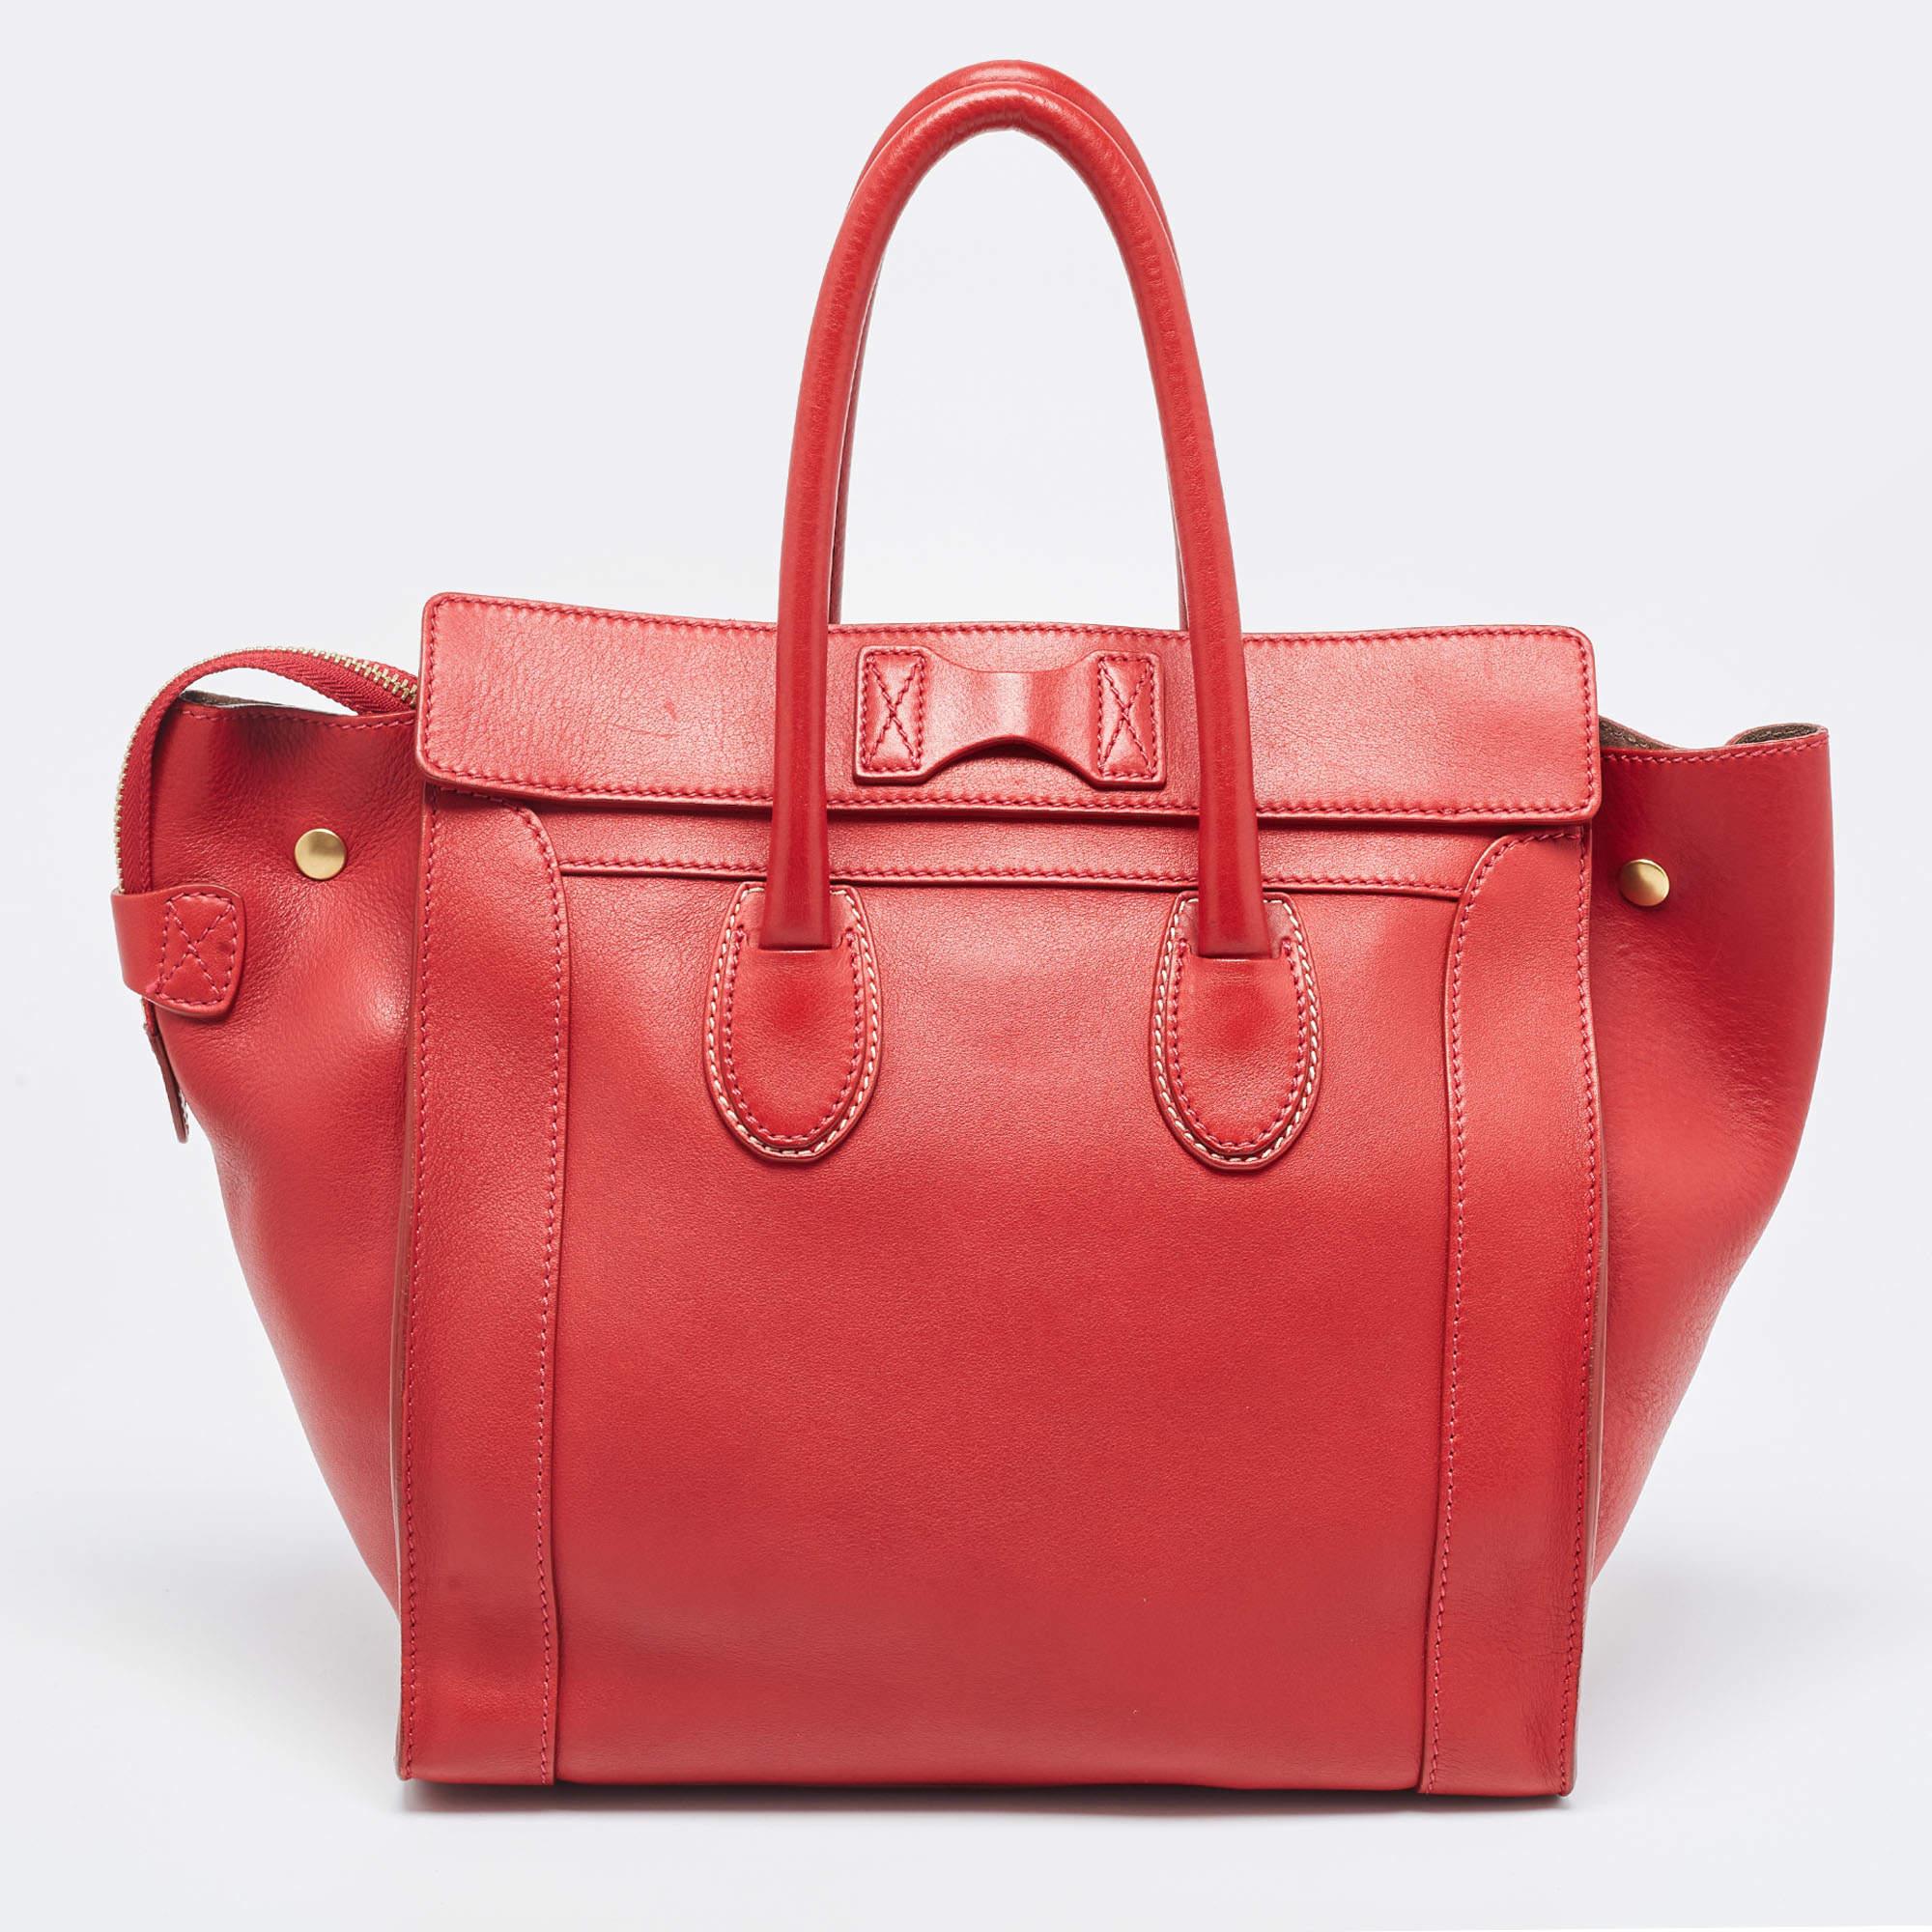 This Celine red tote for women is super classy and functional, perfect for everyday use. We like the luxe details and its high-quality finish.

